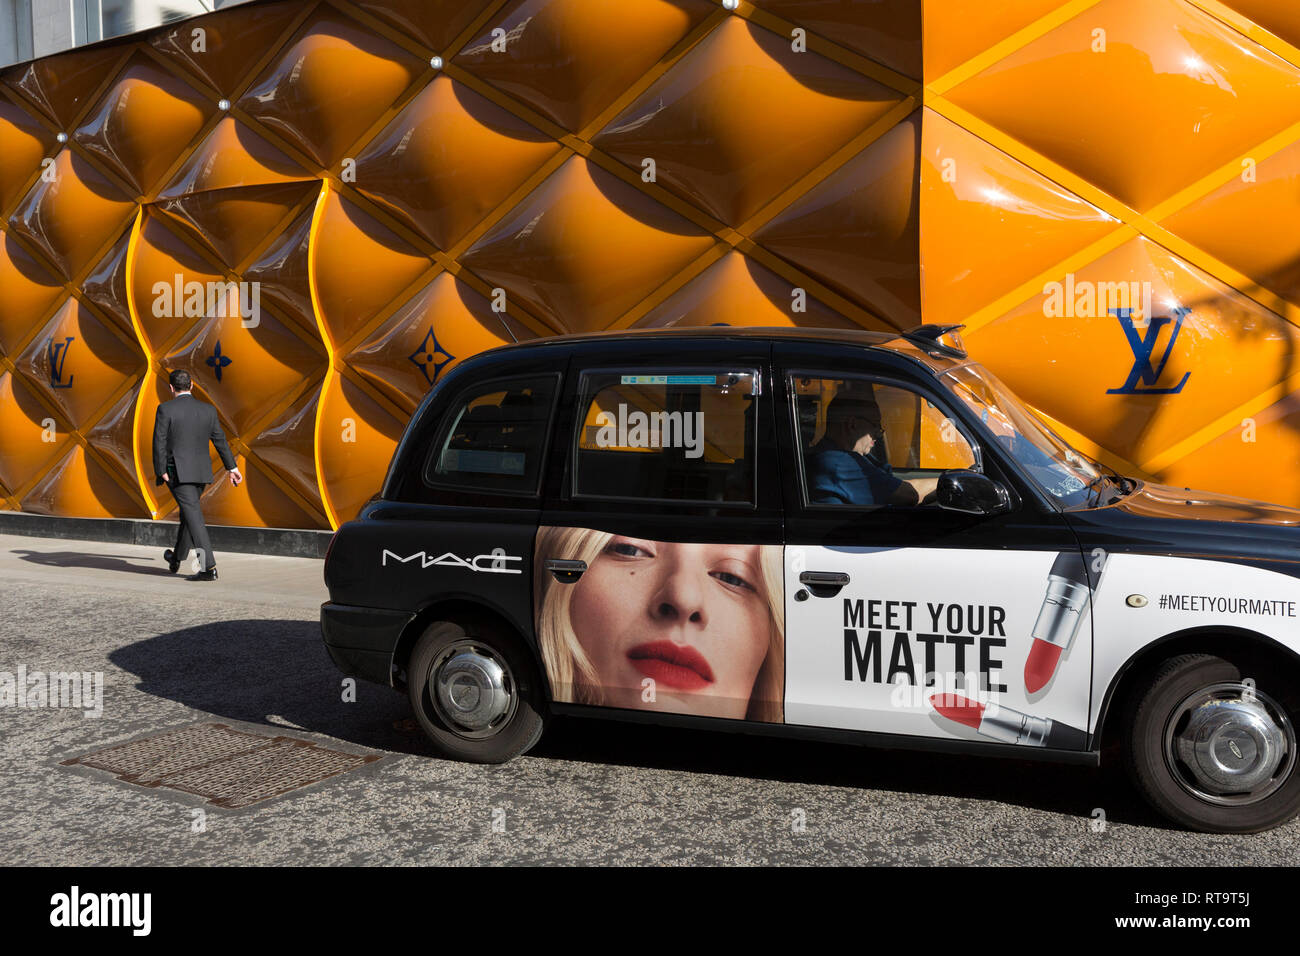 A black cab with advertising for a lipstick brand on the door